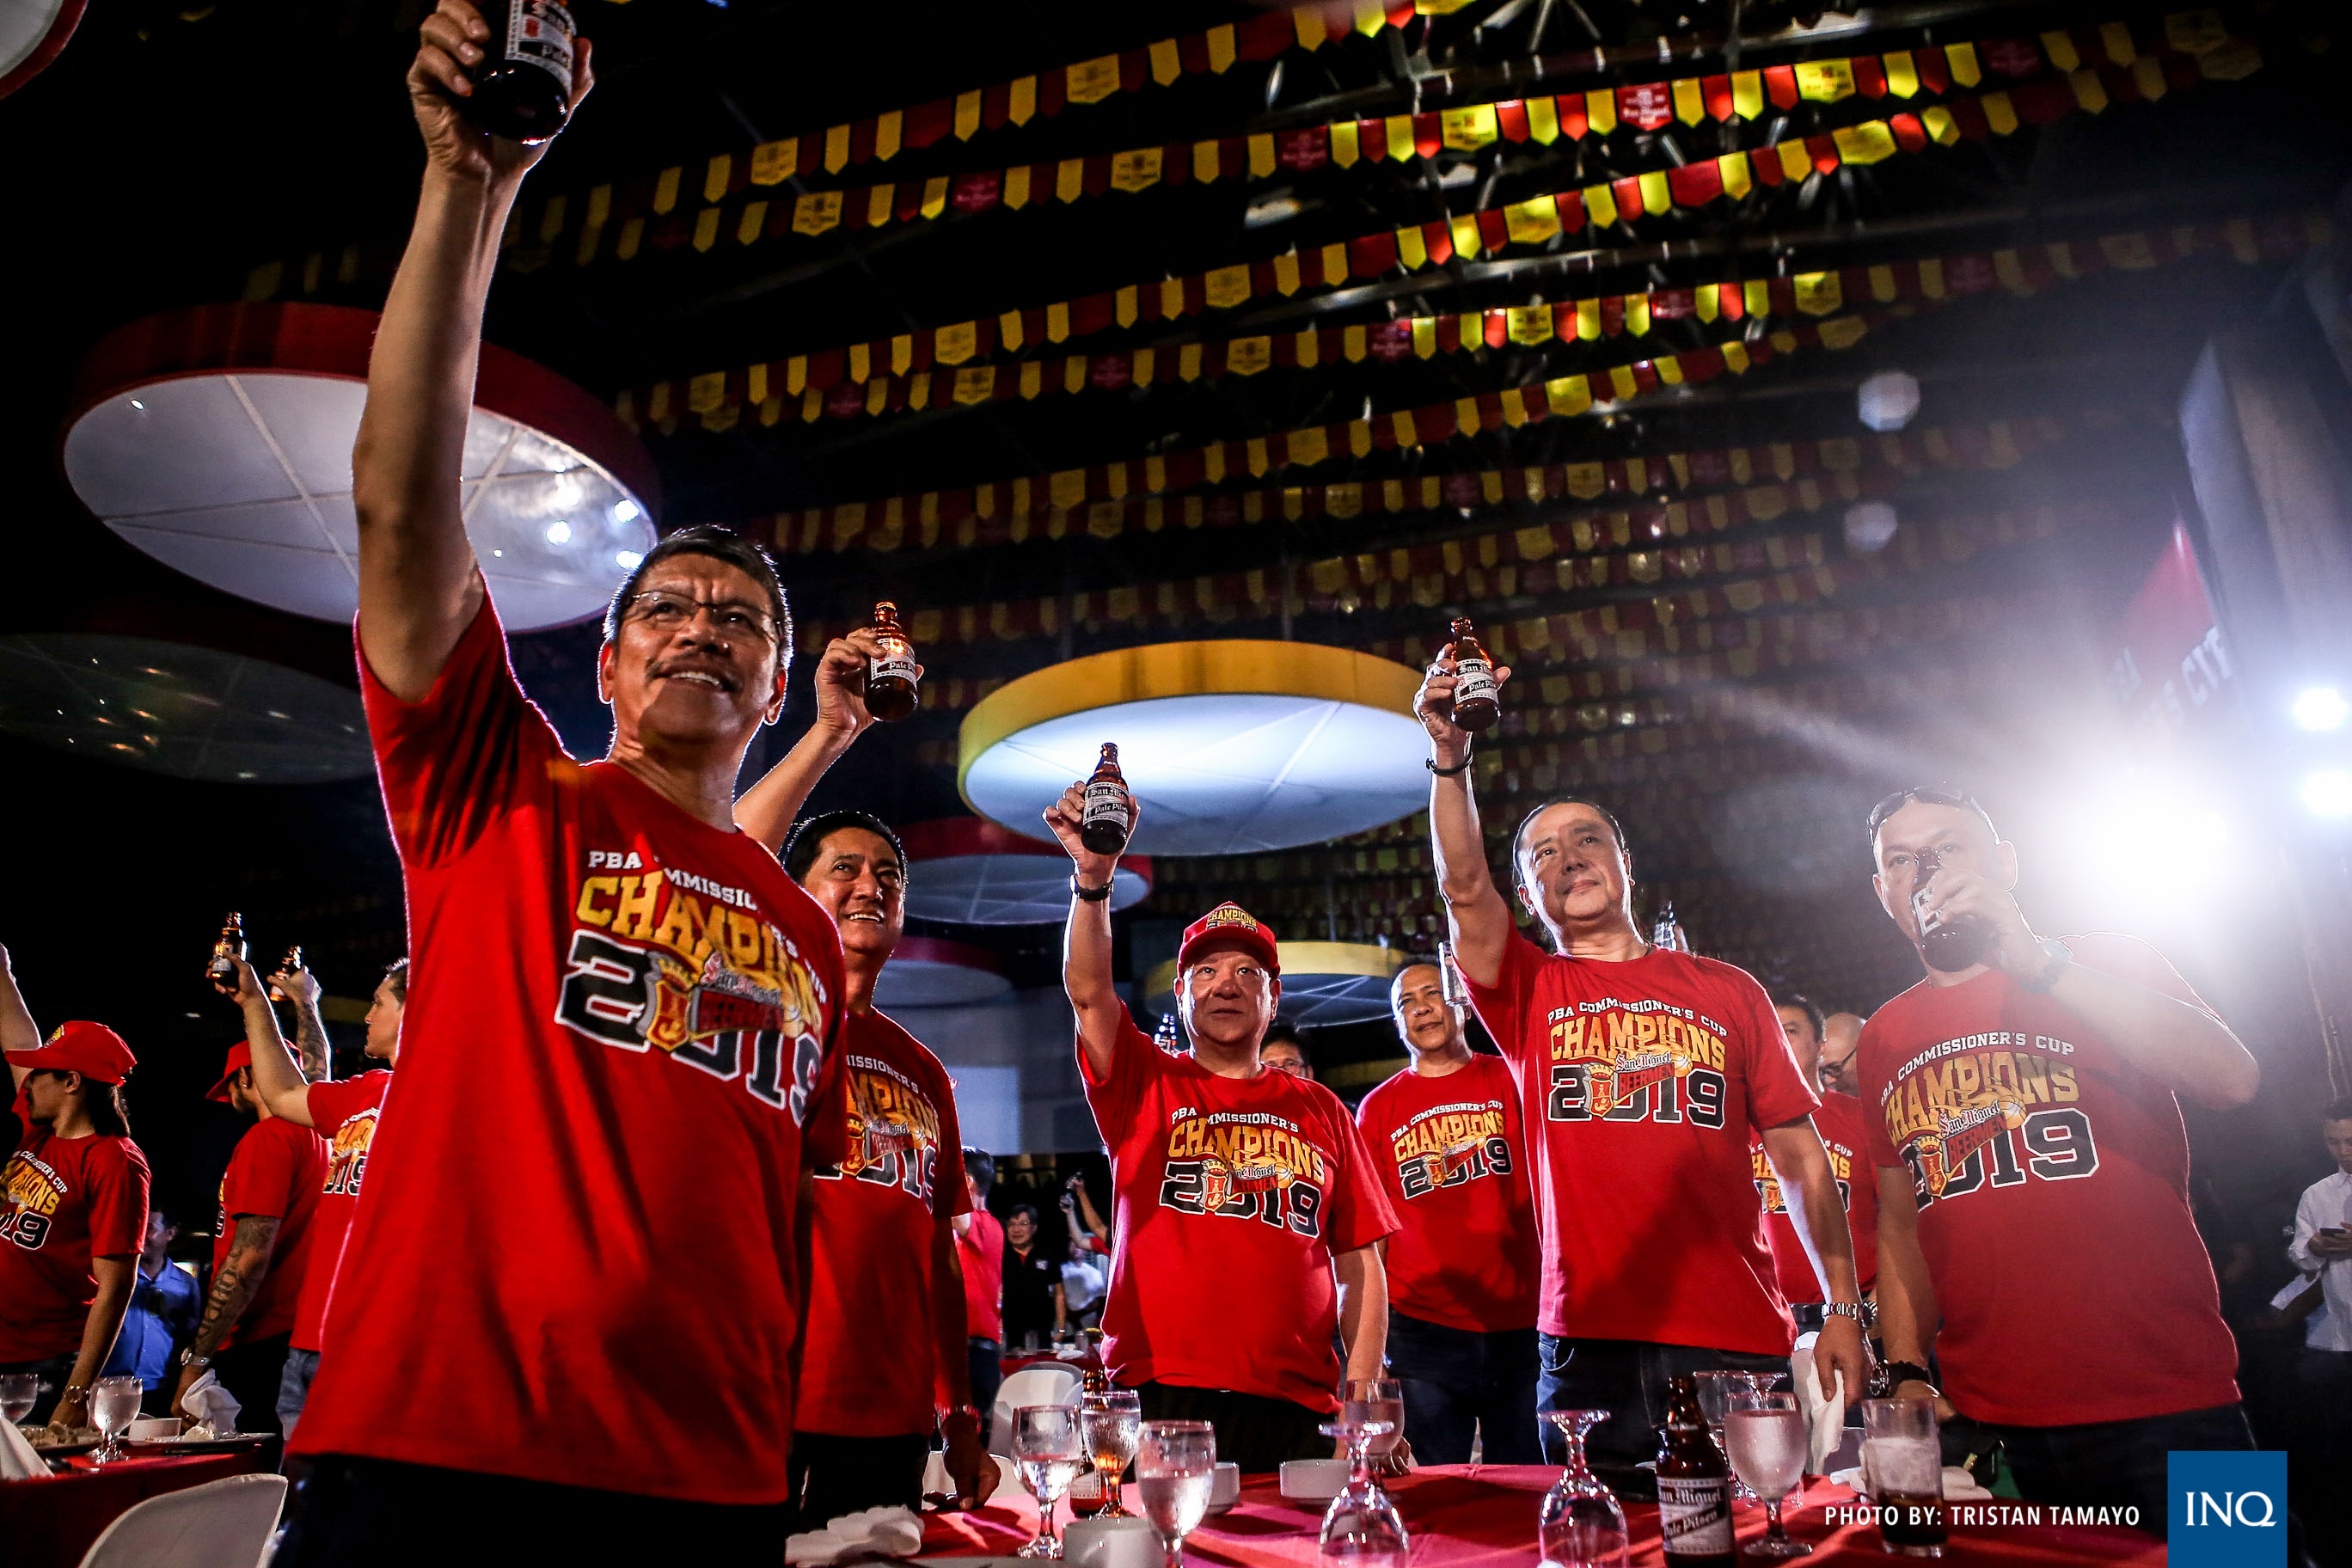 San Miguel executives along with head coach Leo Austria raise a toast. Photo by Tristan Tamayo/INQUIRER.net